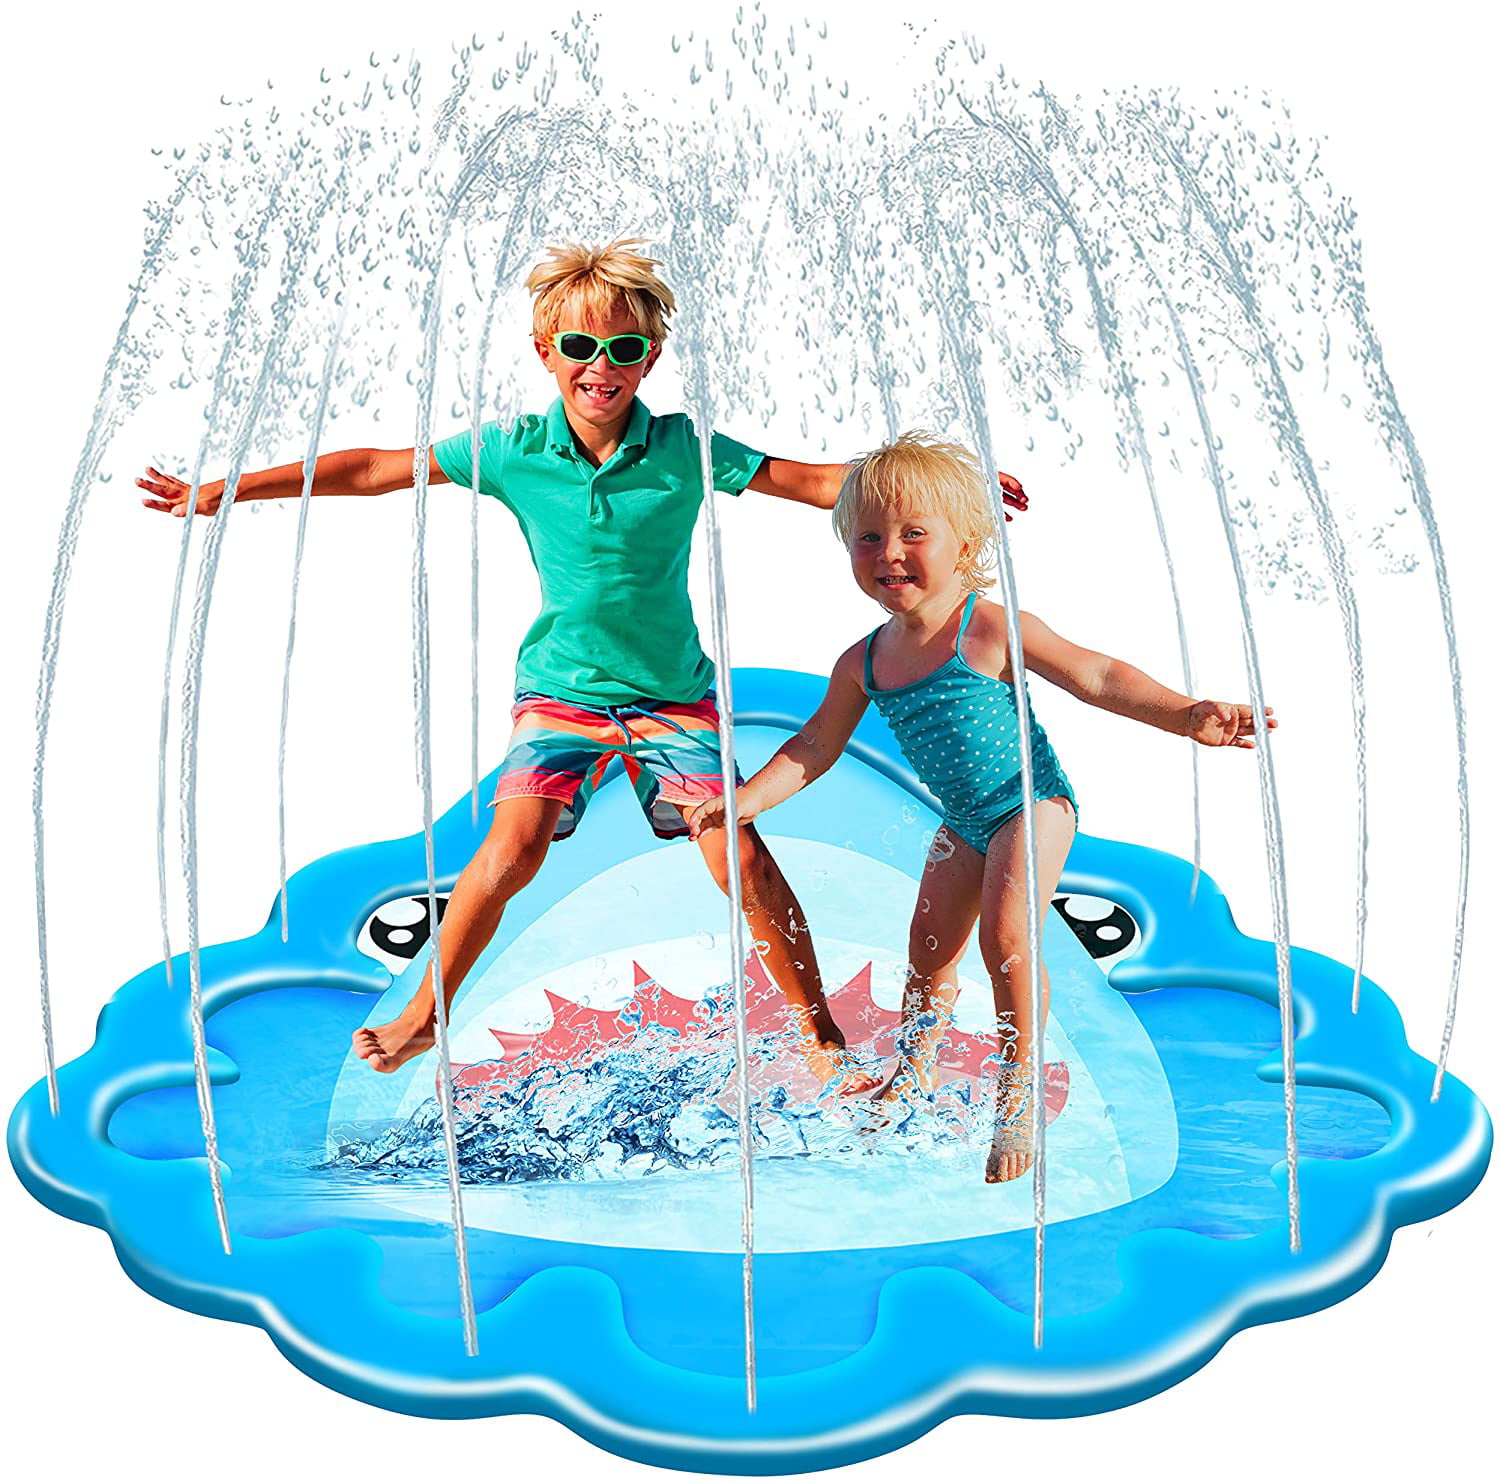 MIJOYEE Splash Pad Buie Shark Outdoor Water Play Sprinklers Summer Toys Fun for Infants Toddlers and Kids in Backyard Playing 68 inches Splash Mat 